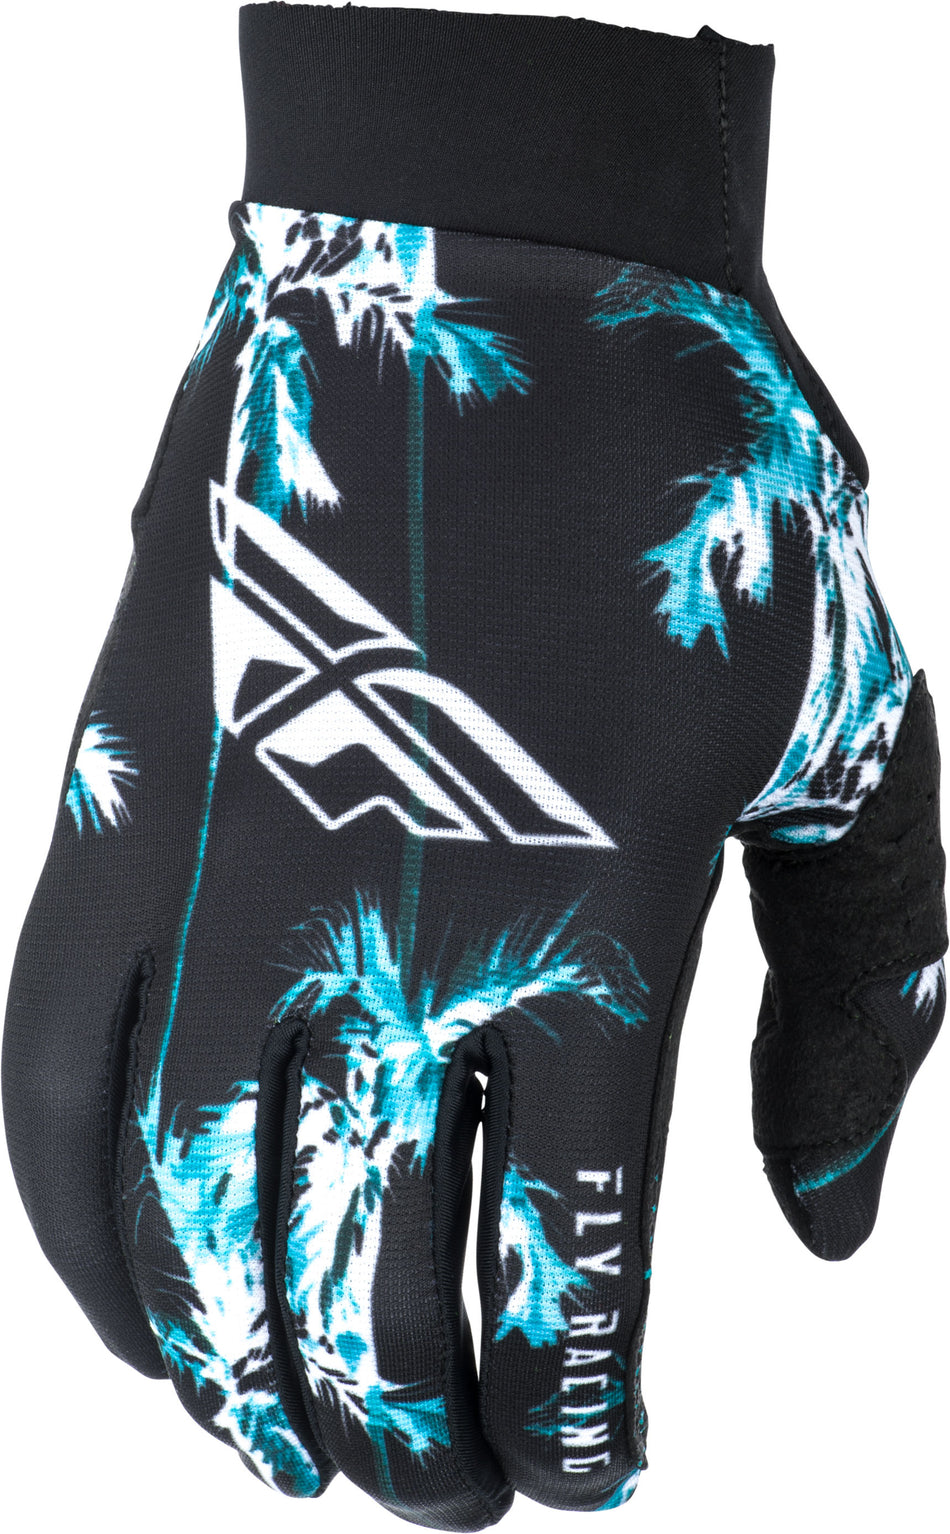 FLY RACING Pro Lite Paradise Gloves Teal/Black Sz 10 372-81910